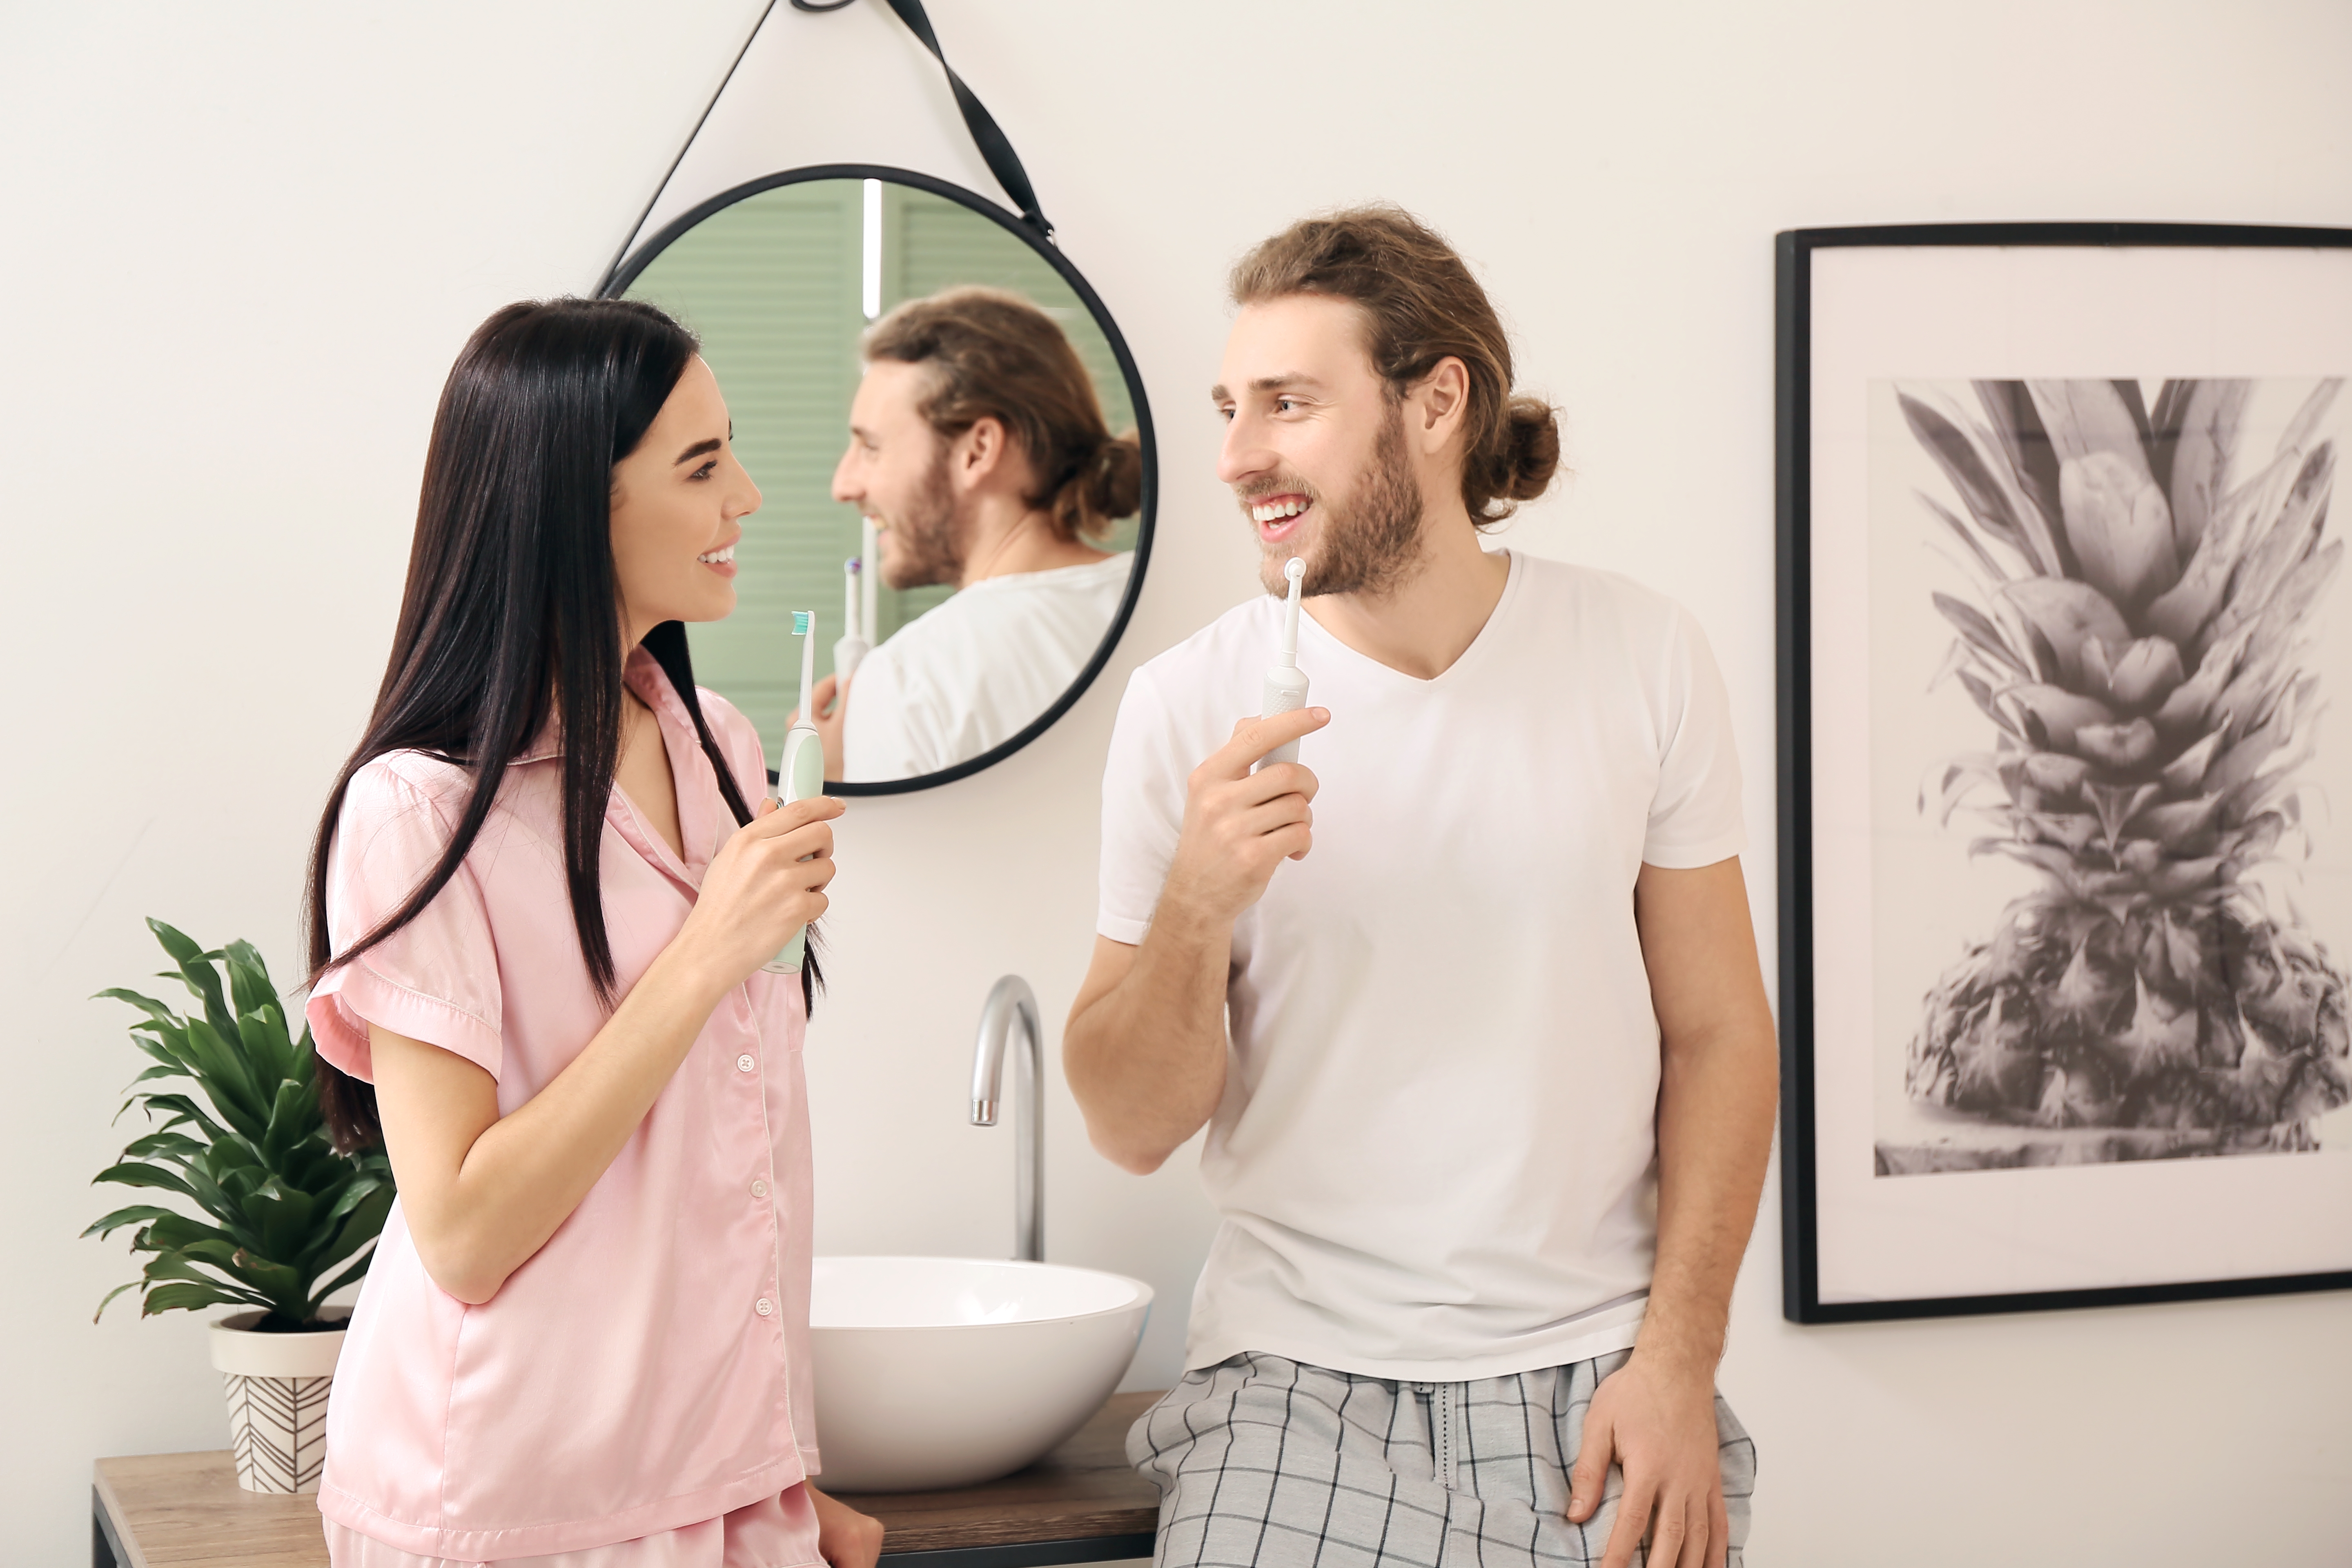 Man and woman holding electric toothbrushes